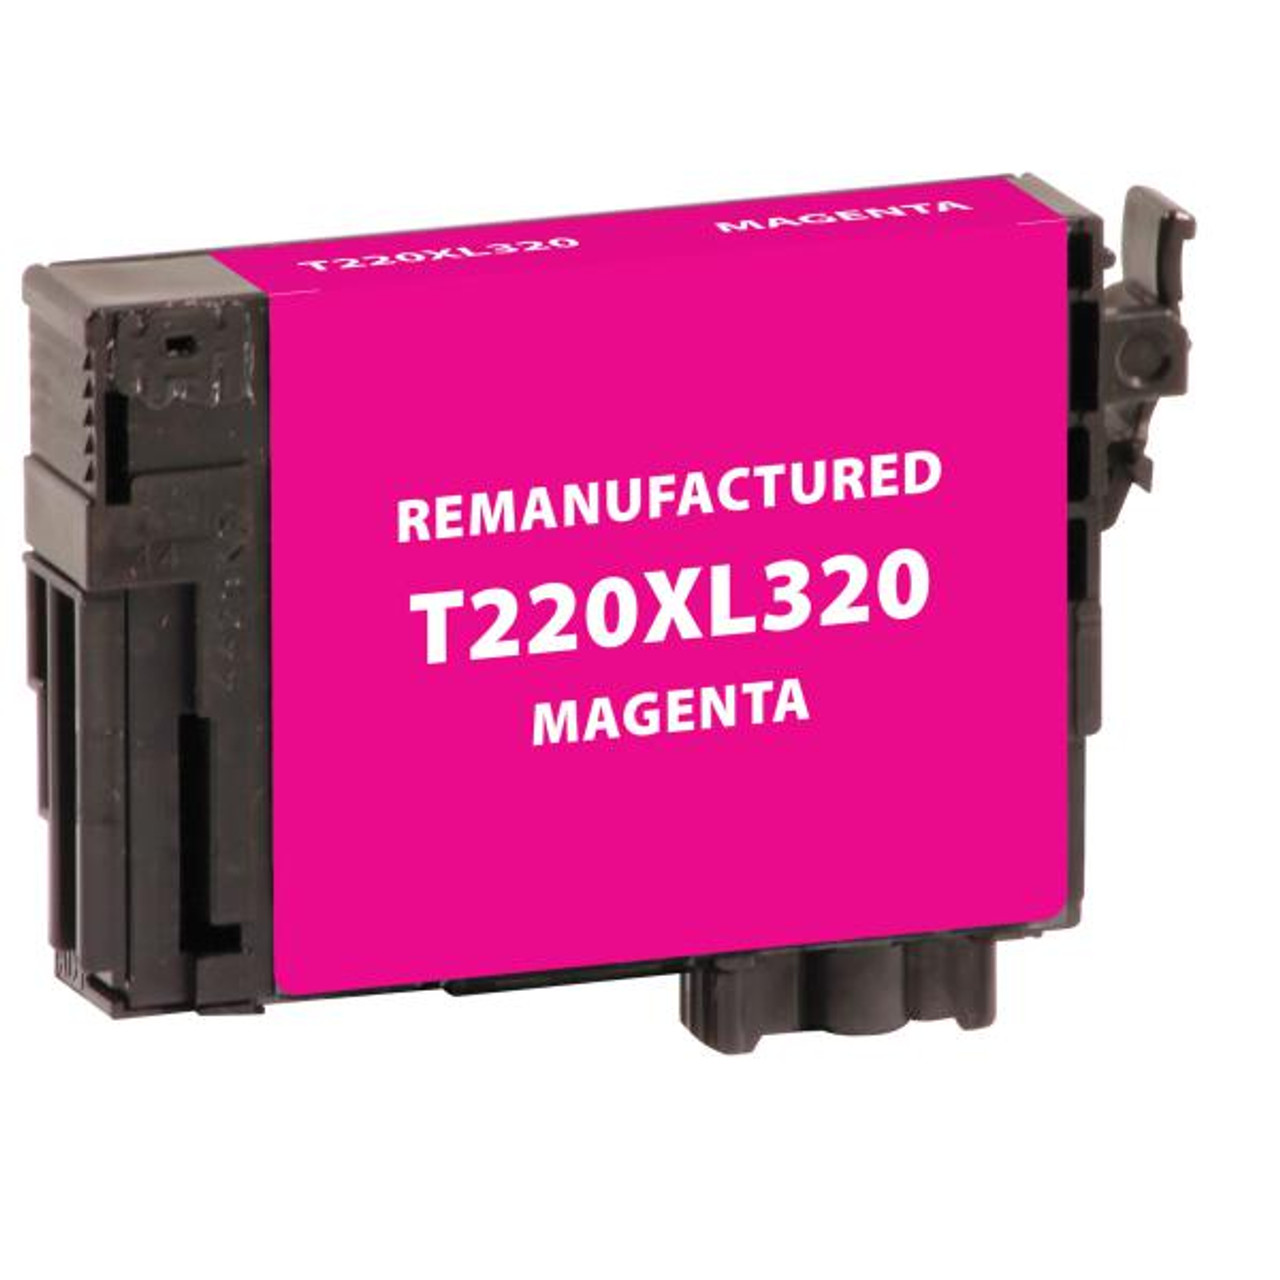 High Capacity Magenta Ink Cartridge for Epson T220XL320-1